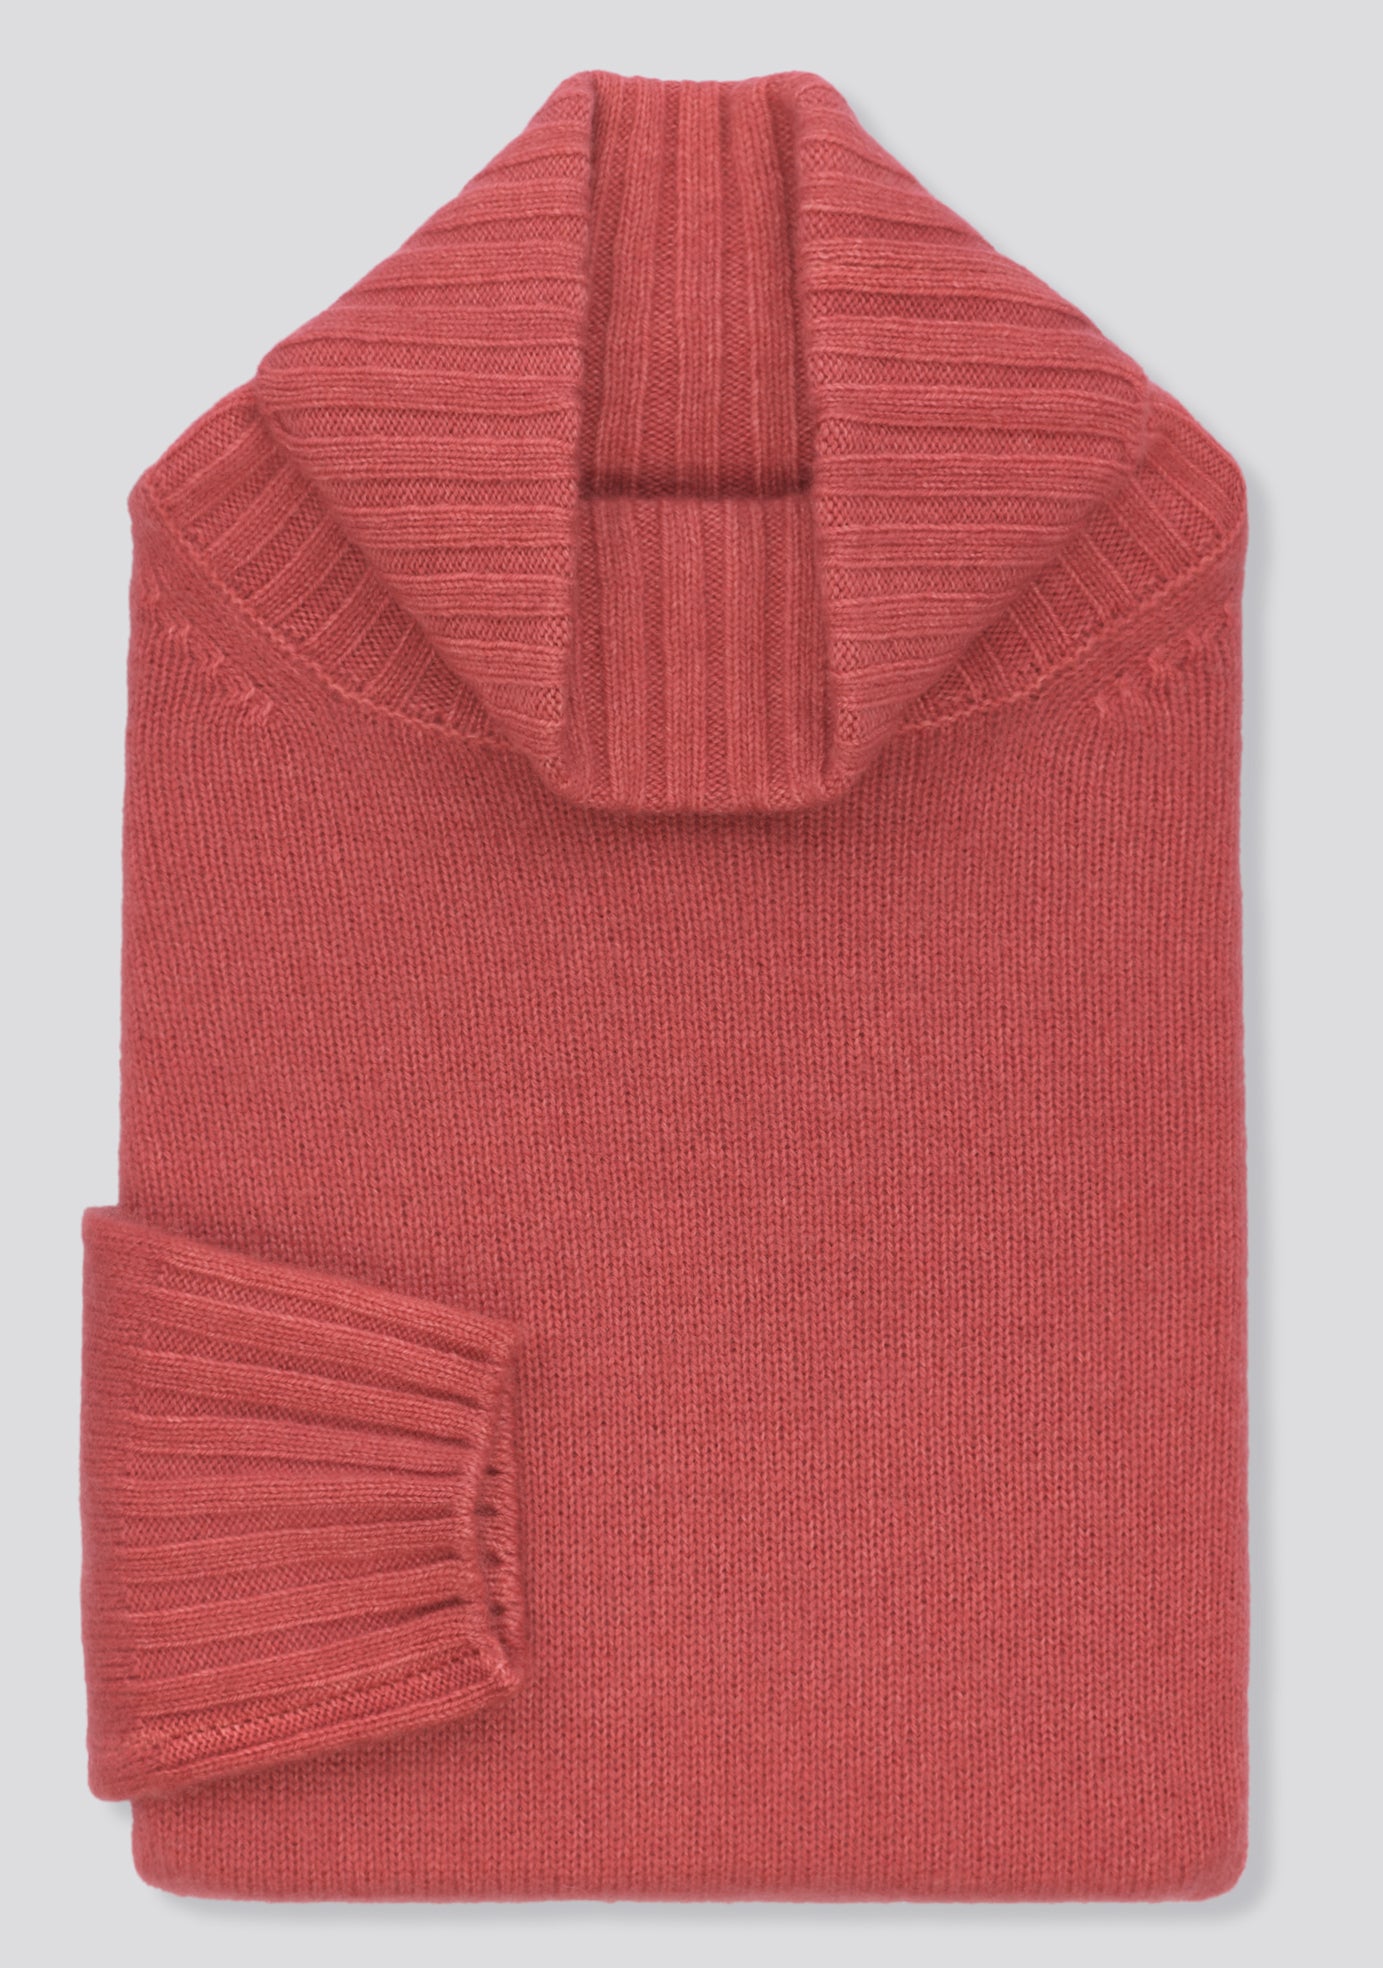 Coral Red Wool and Cashmere Turtleneck